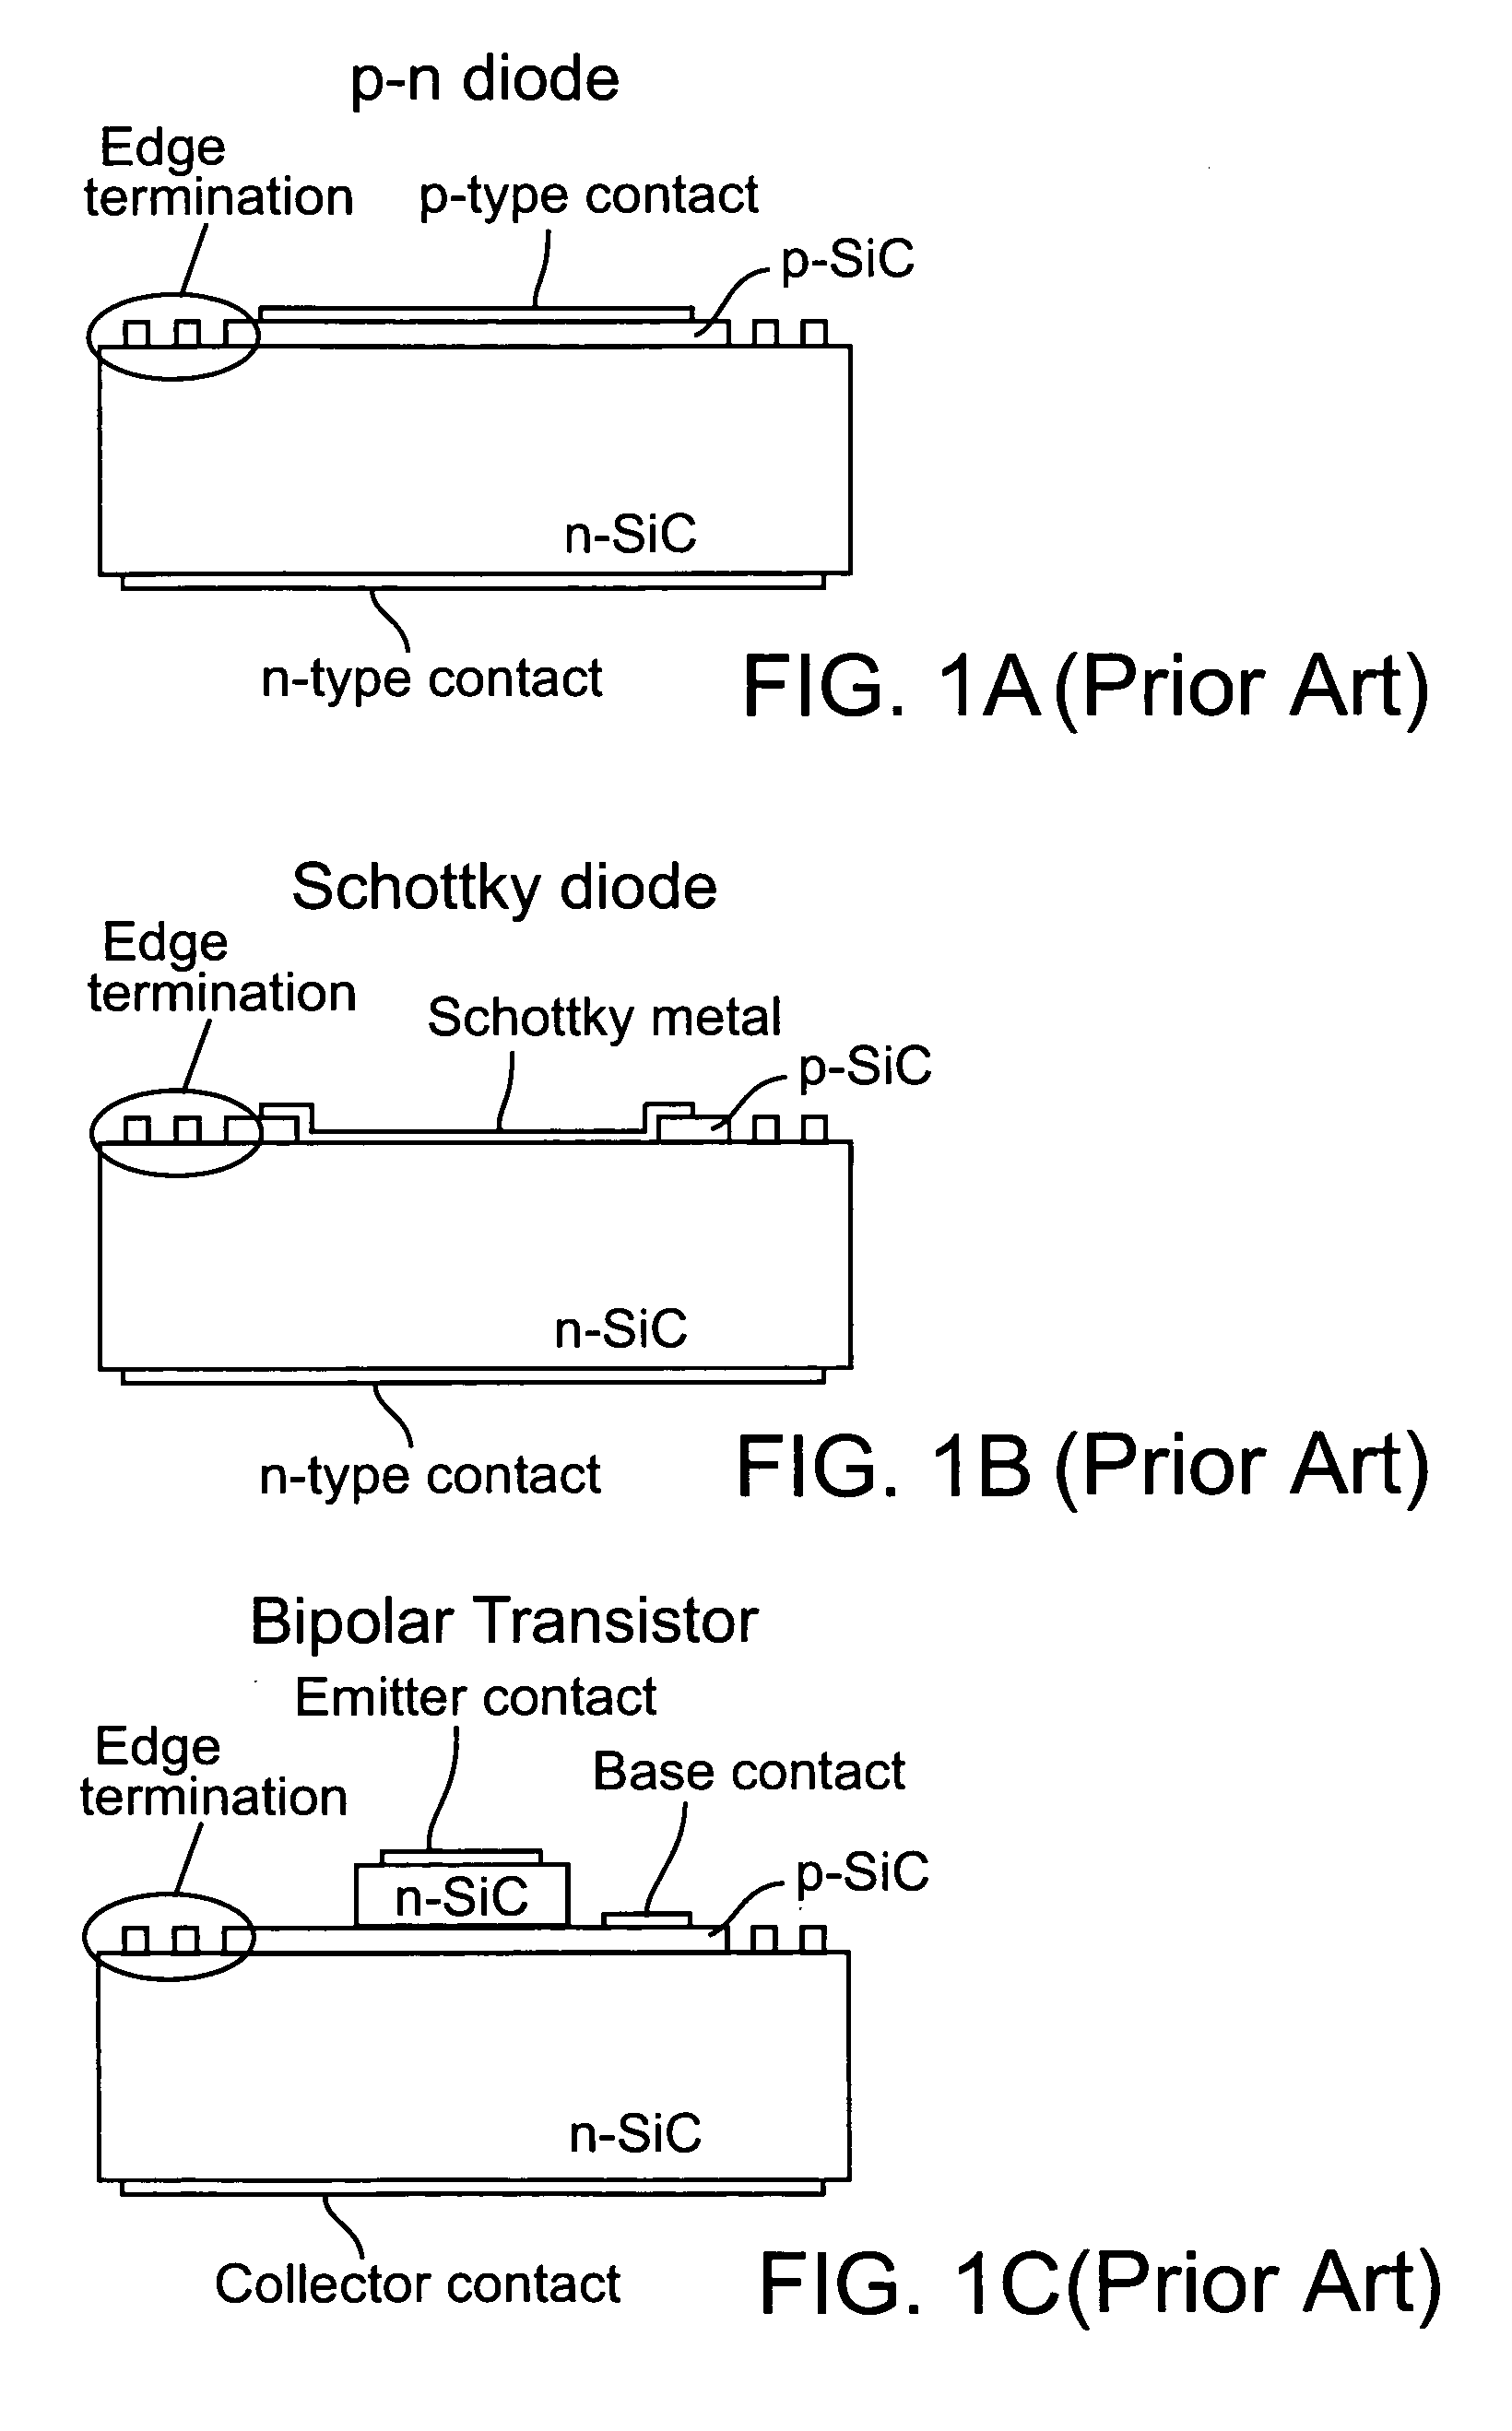 Junction termination structures for wide-bandgap power devices